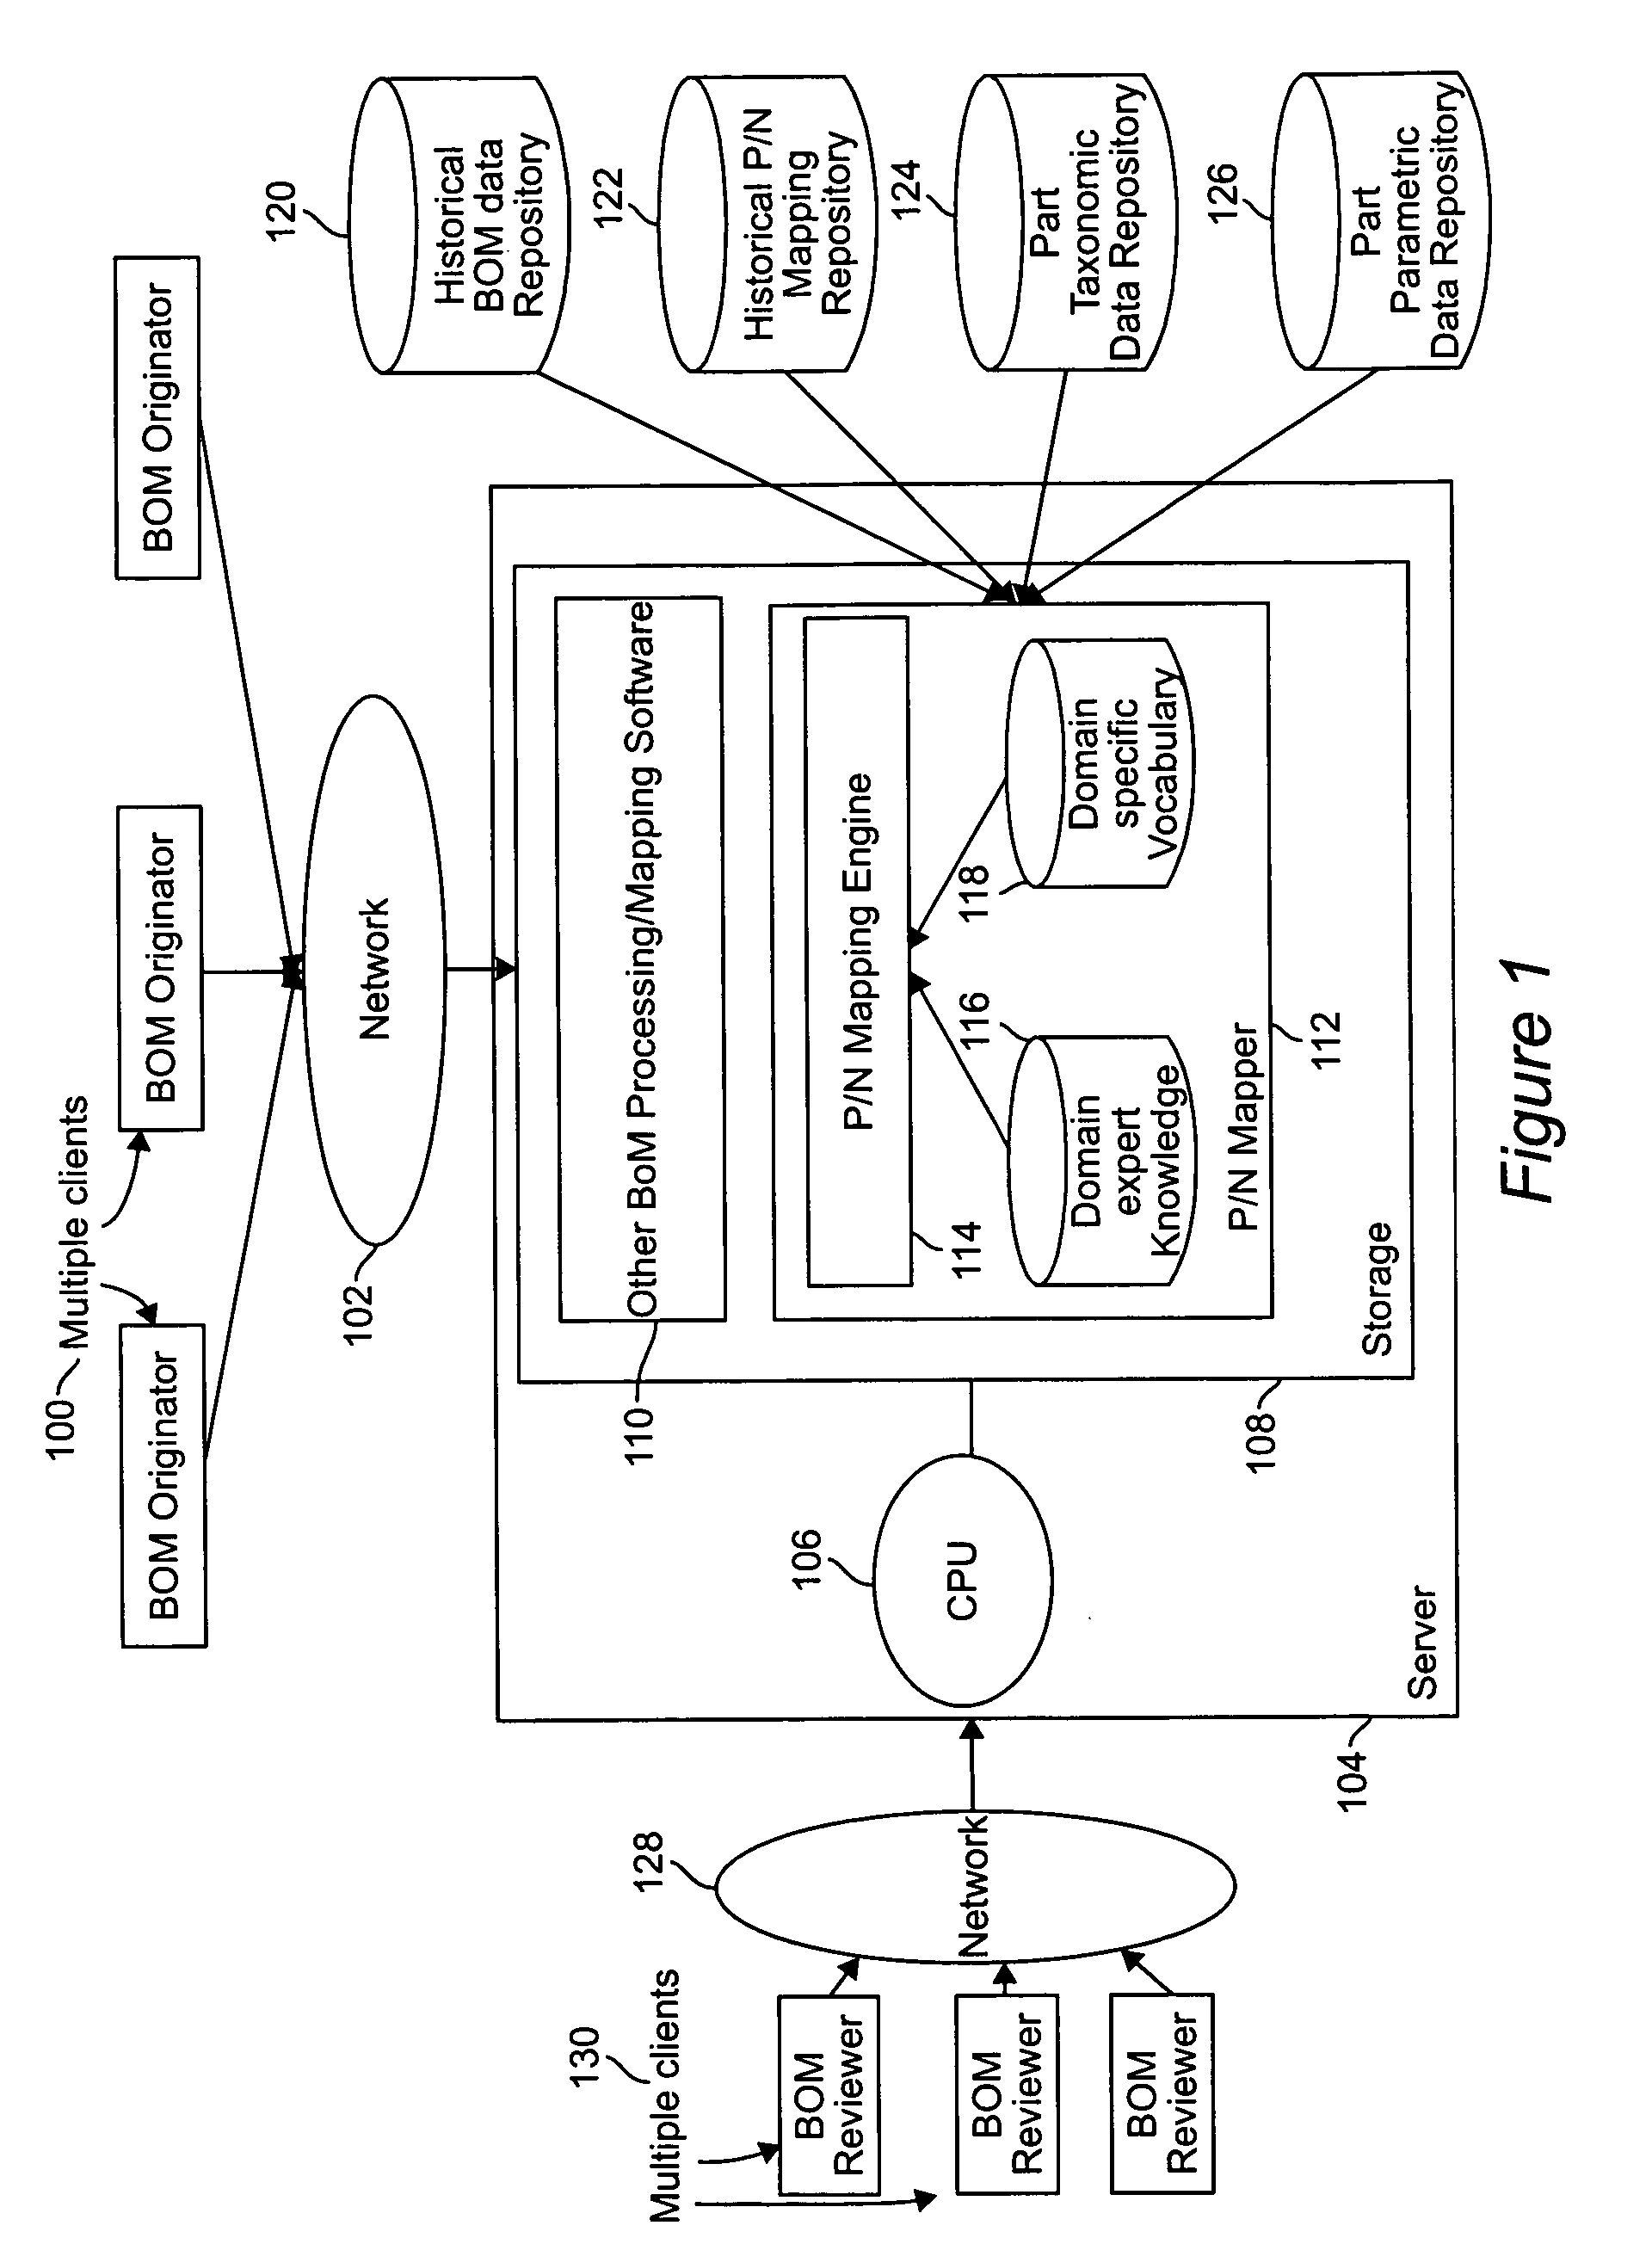 System and method for automated part-number mapping